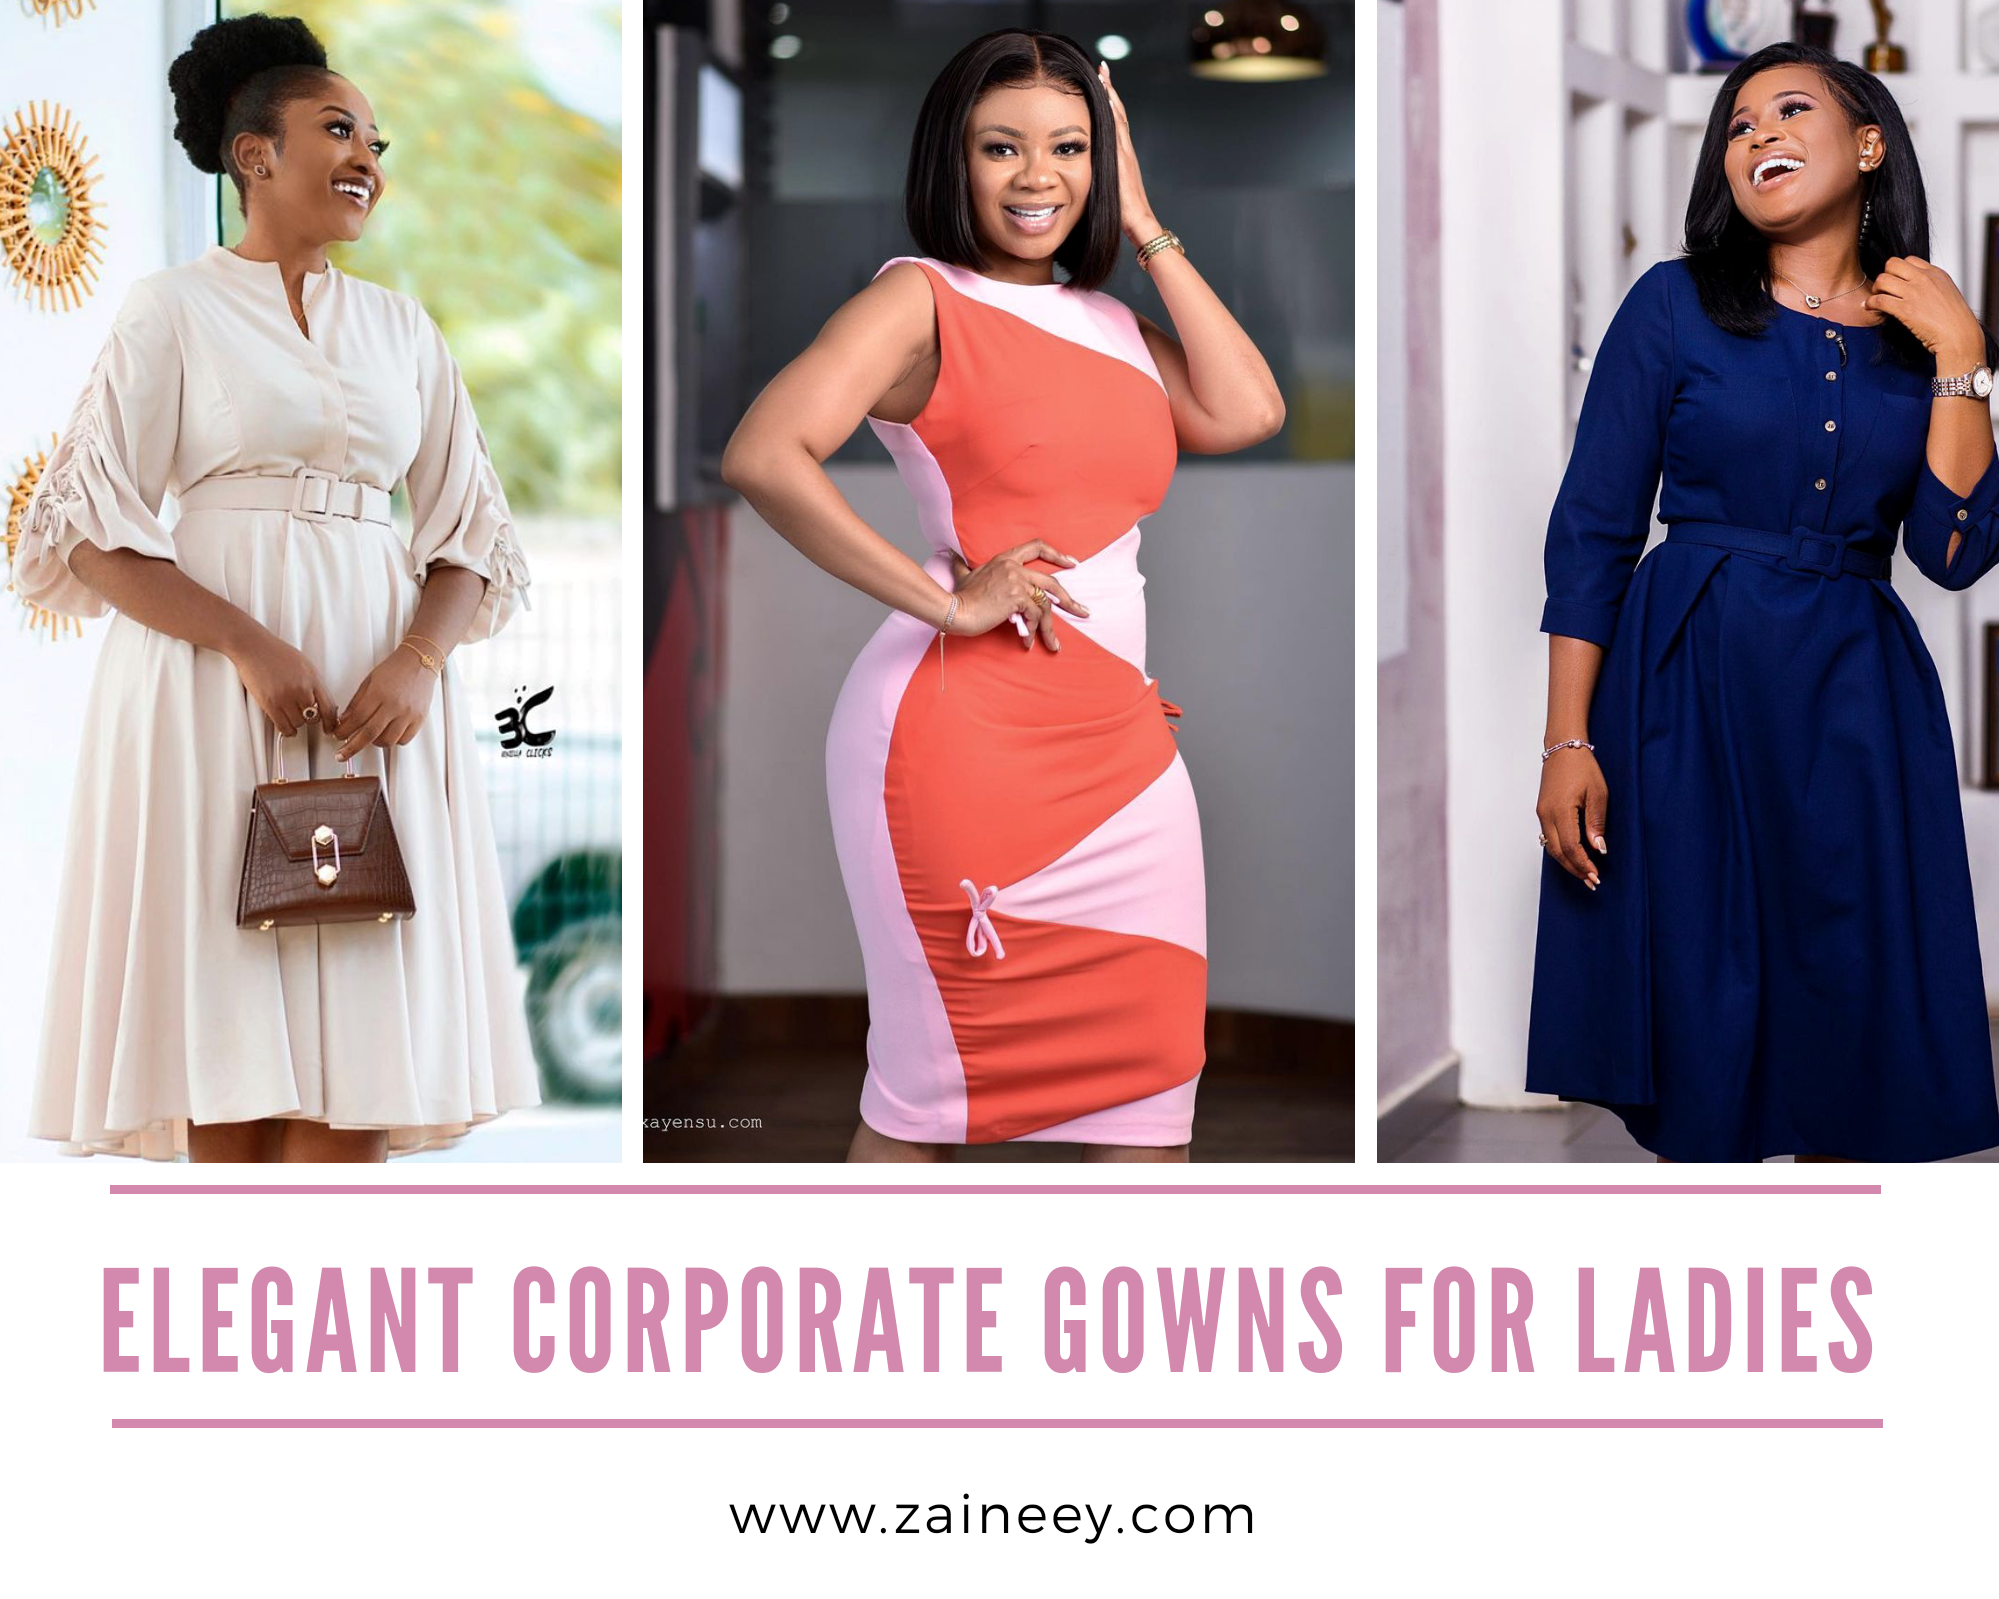 Stunning, Classy, and Elegant Corporate Gowns for Ladies.